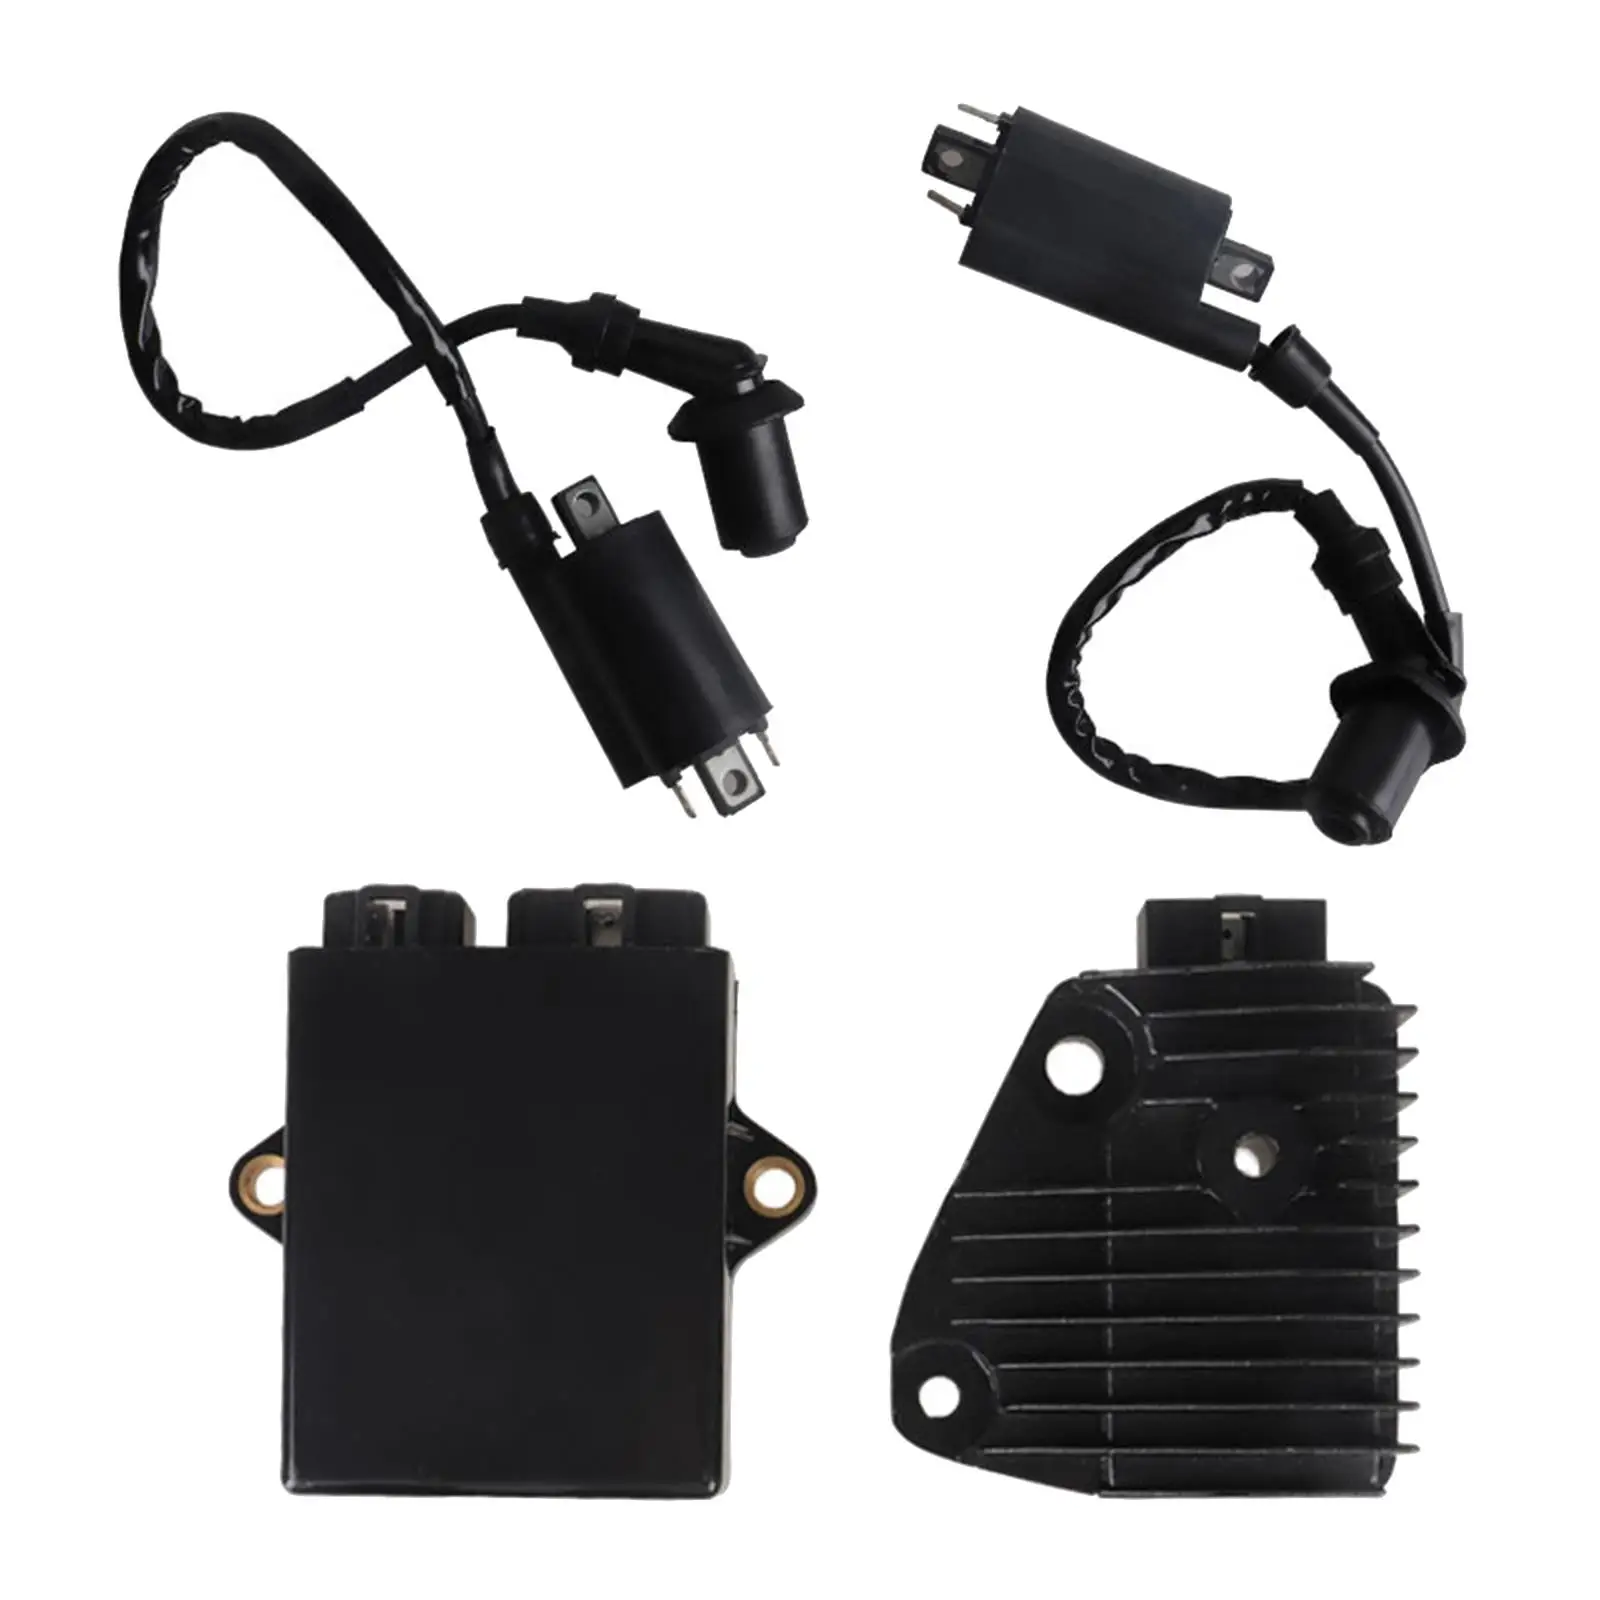 Cdi Ignition Coil Regulator Replaces, Durable, Premium ,High Performance Motorcycles Accessories for XV250 Route 66 V-star 250